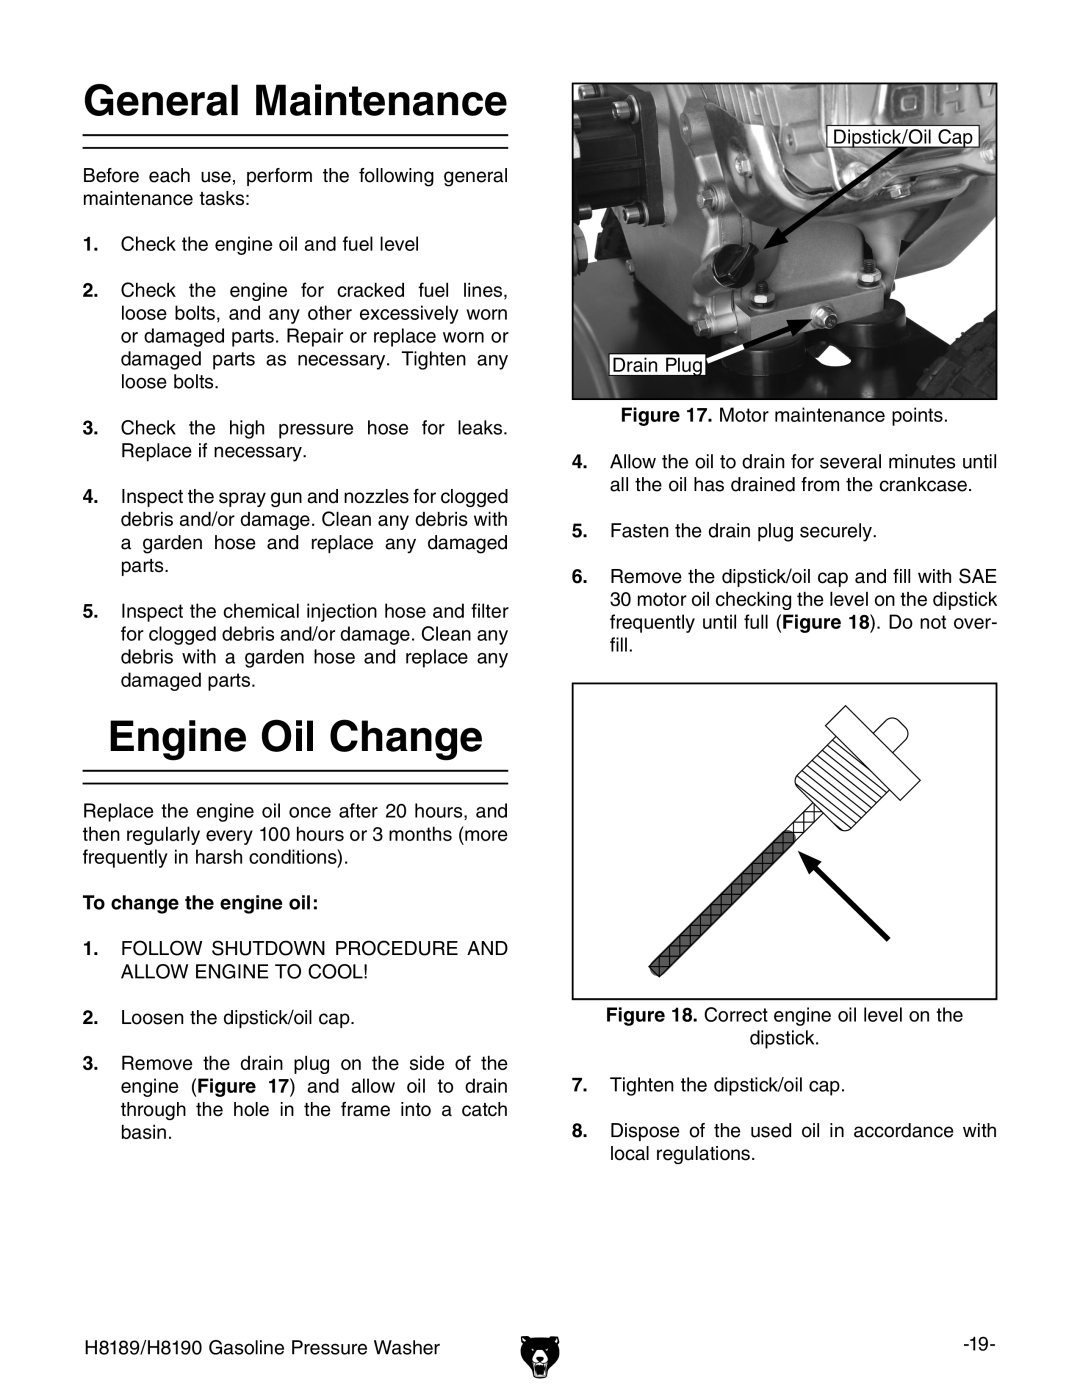 Grizzly H8189/H8190 owner manual General Maintenance, Engine Oil Change, To change the engine oil 